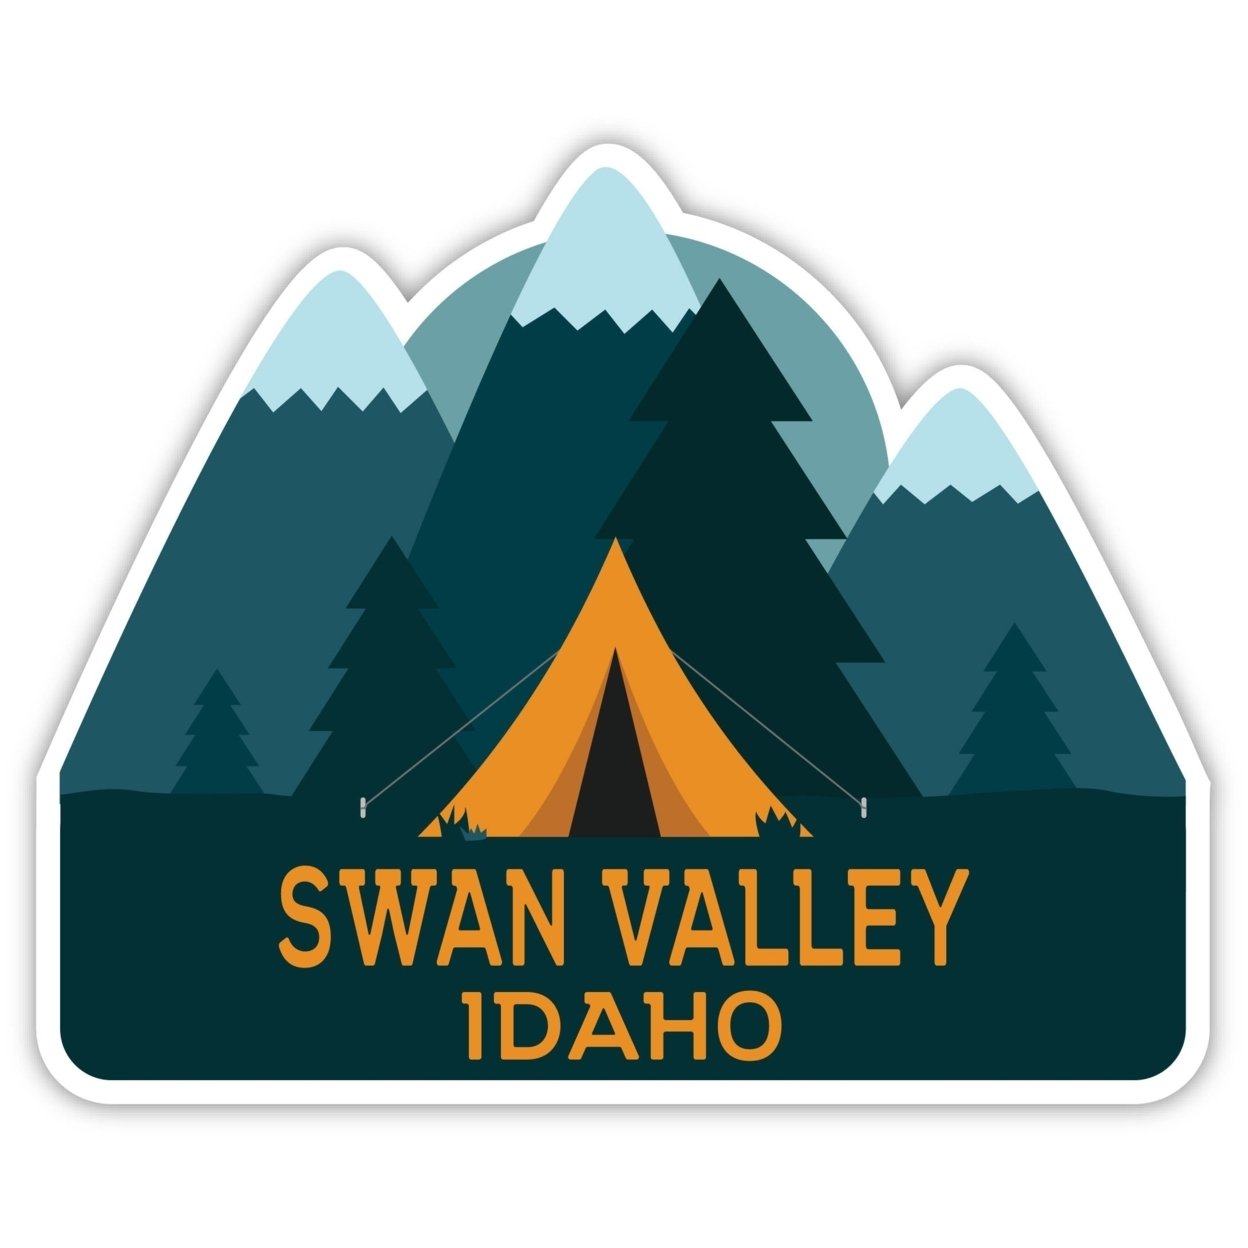 Swan Valley Idaho Souvenir Decorative Stickers (Choose Theme And Size) - Single Unit, 4-Inch, Tent